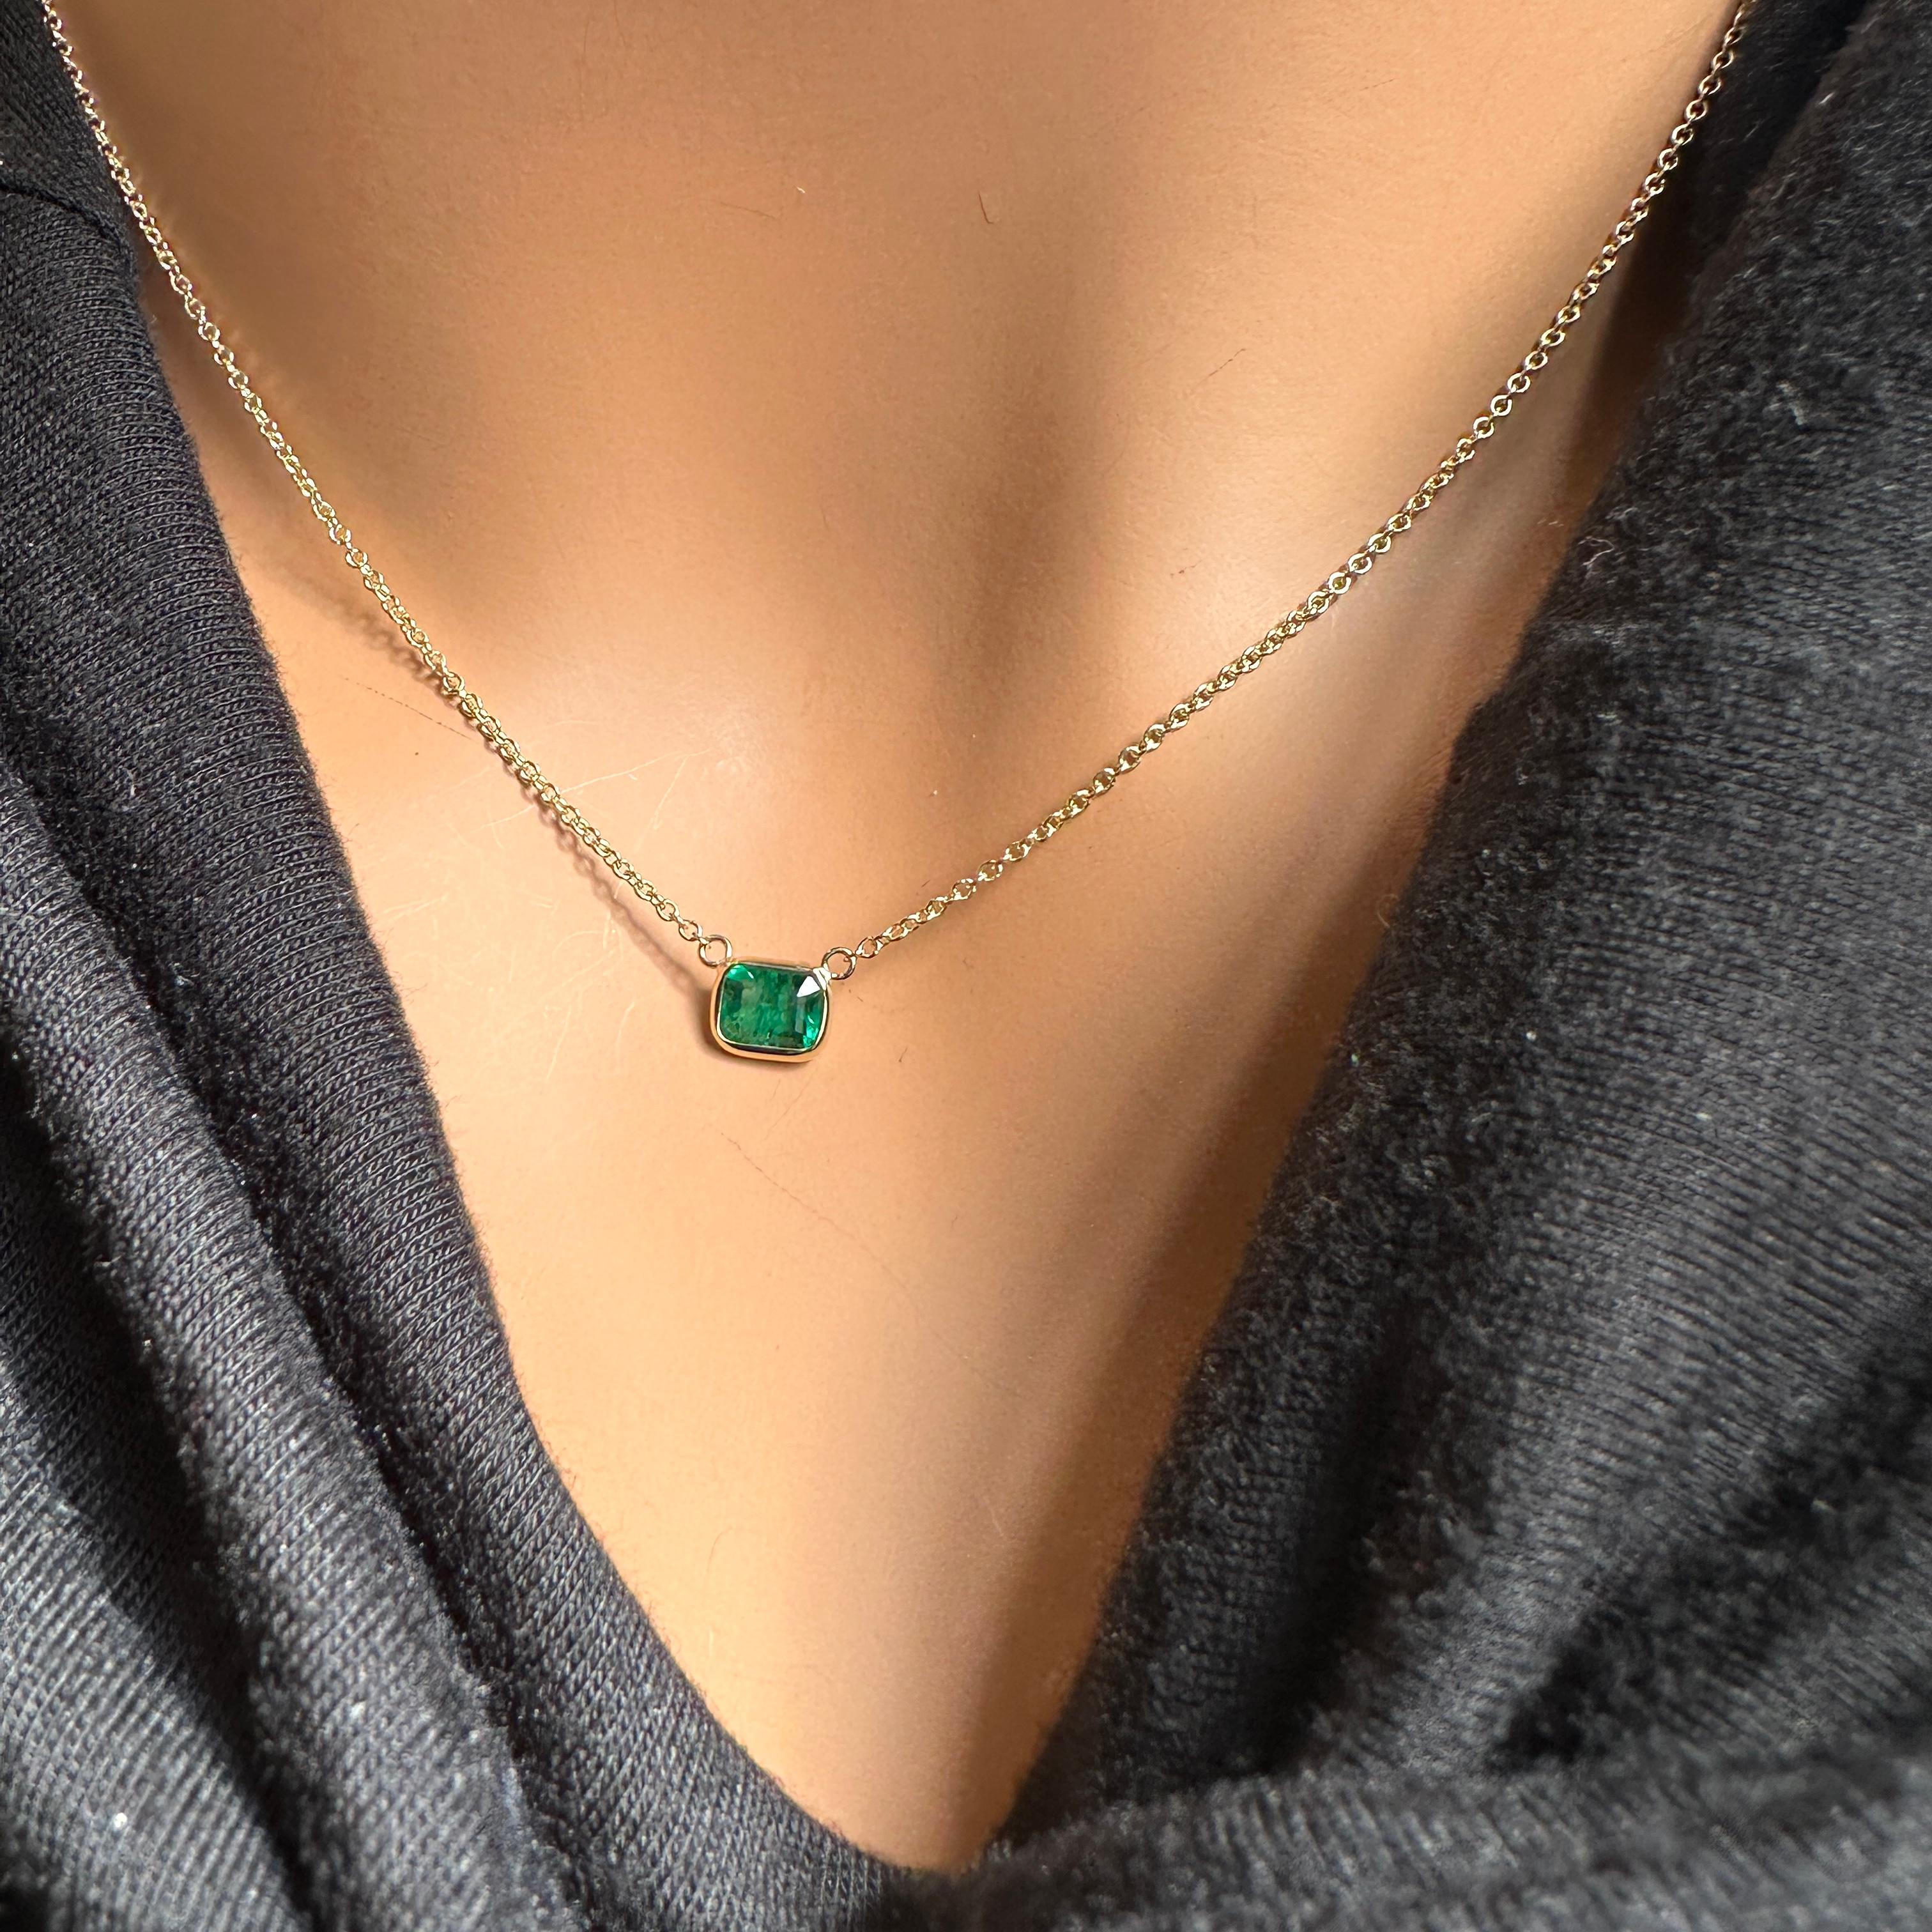 A fashion necklace crafted in 14k yellow gold with a main stone of an emerald-cut gemstone weighing 0.71 carats would be a stunning choice. The main stone in this case is an emerald, known for its vibrant green color and exquisite beauty.